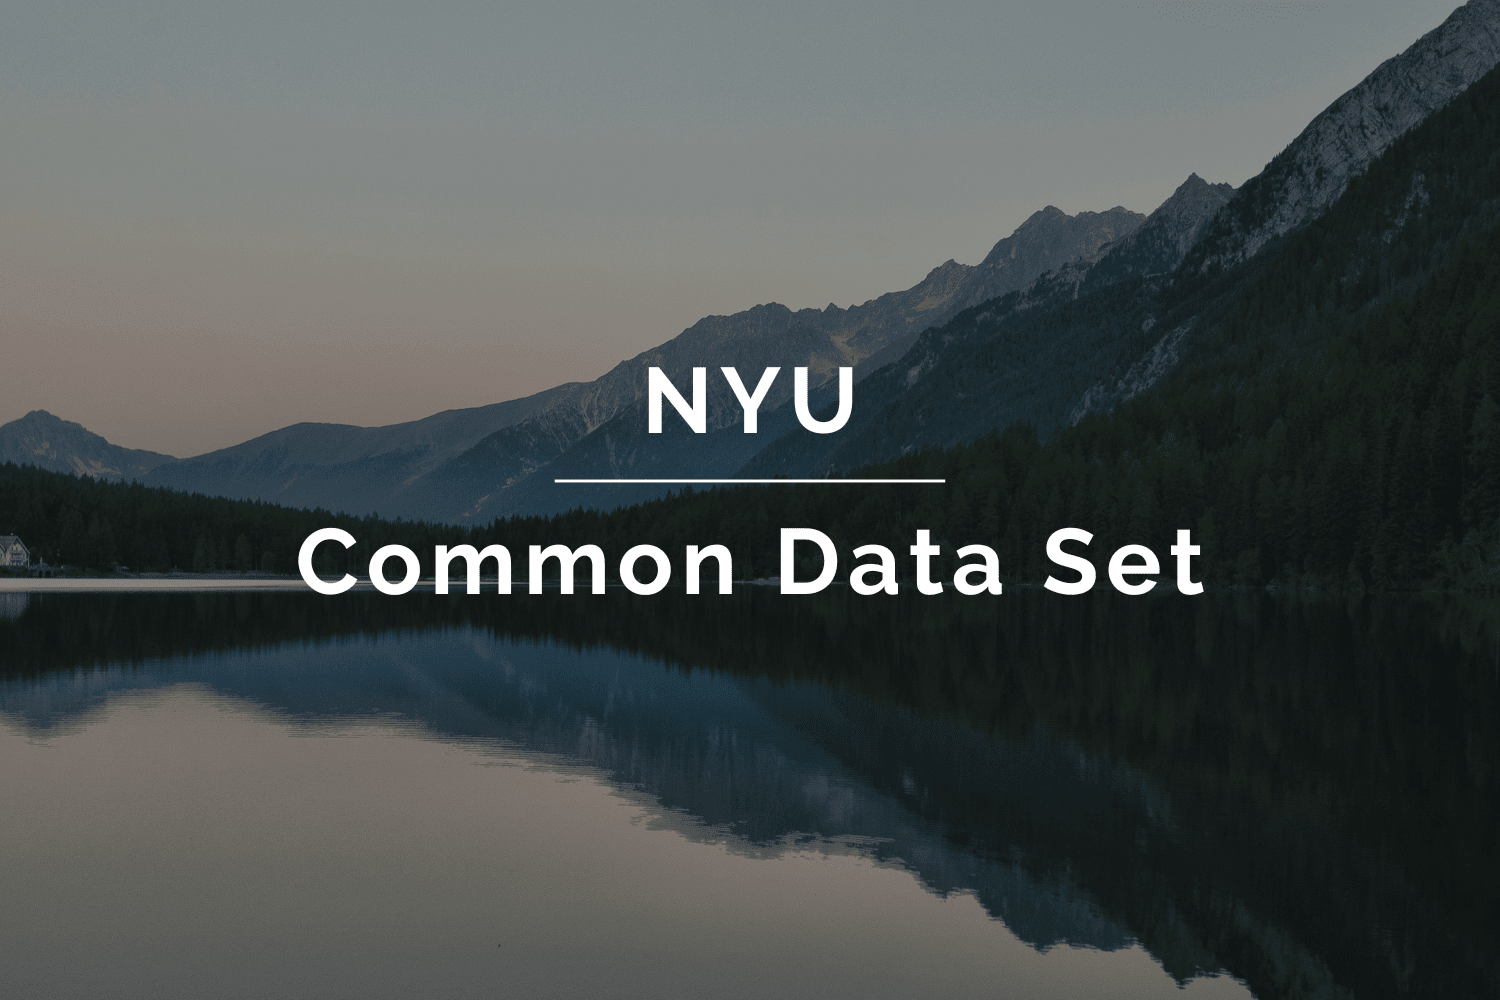 How to Use the NYU Common Data Set